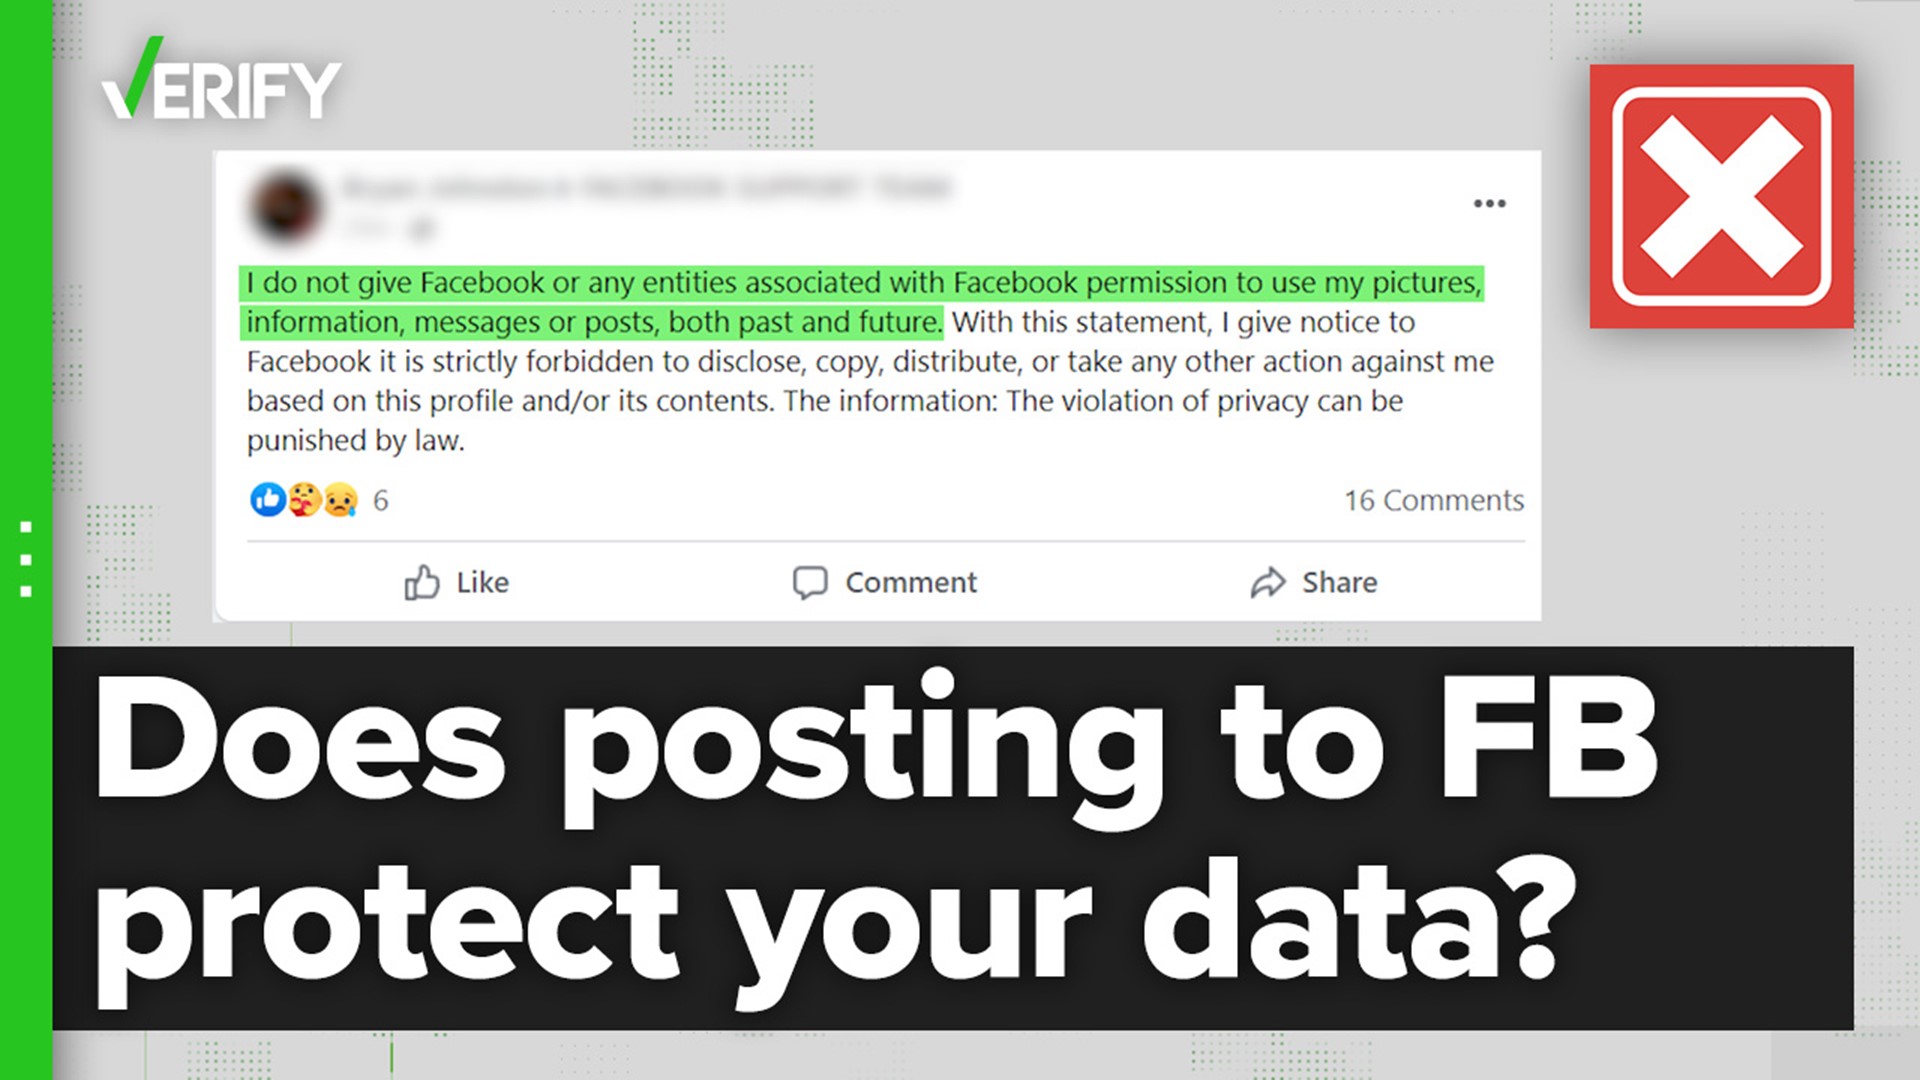 Despite many claims stating otherwise, you cannot prevent Facebook from using your data or photos by posting a message on Facebook.